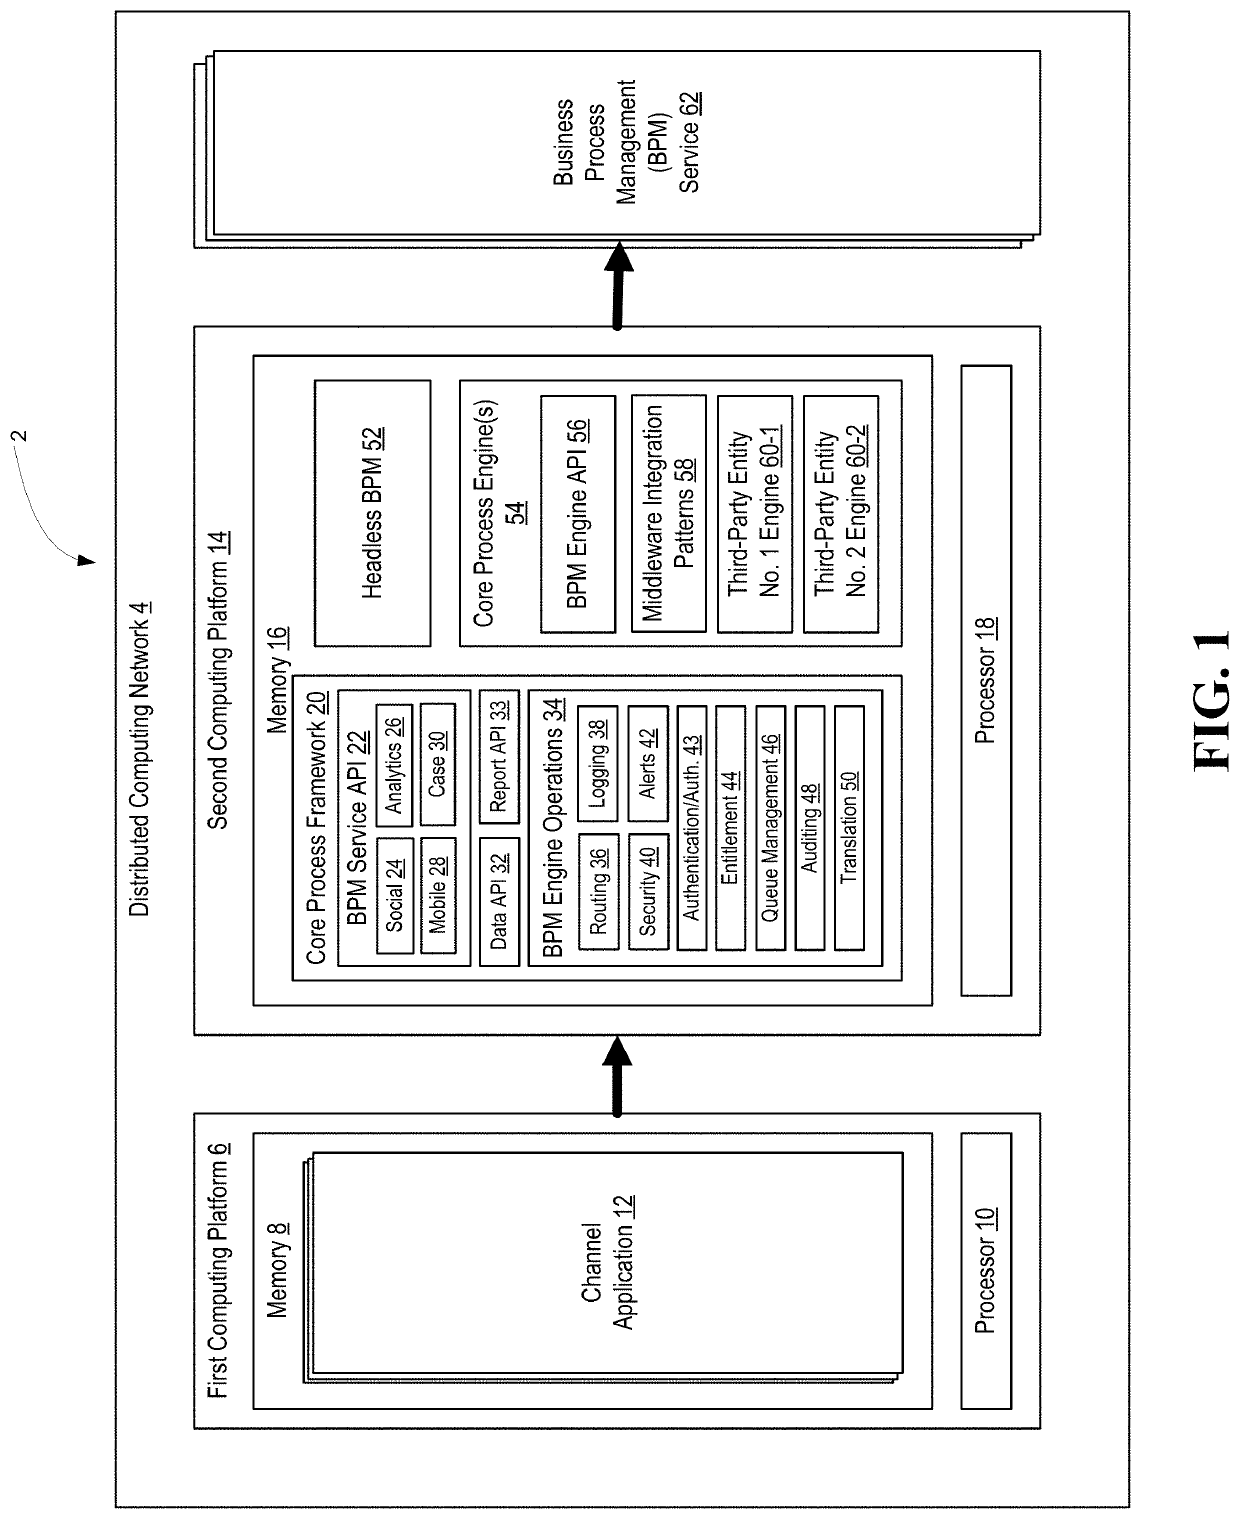 Core process framework for integrating disparate applications